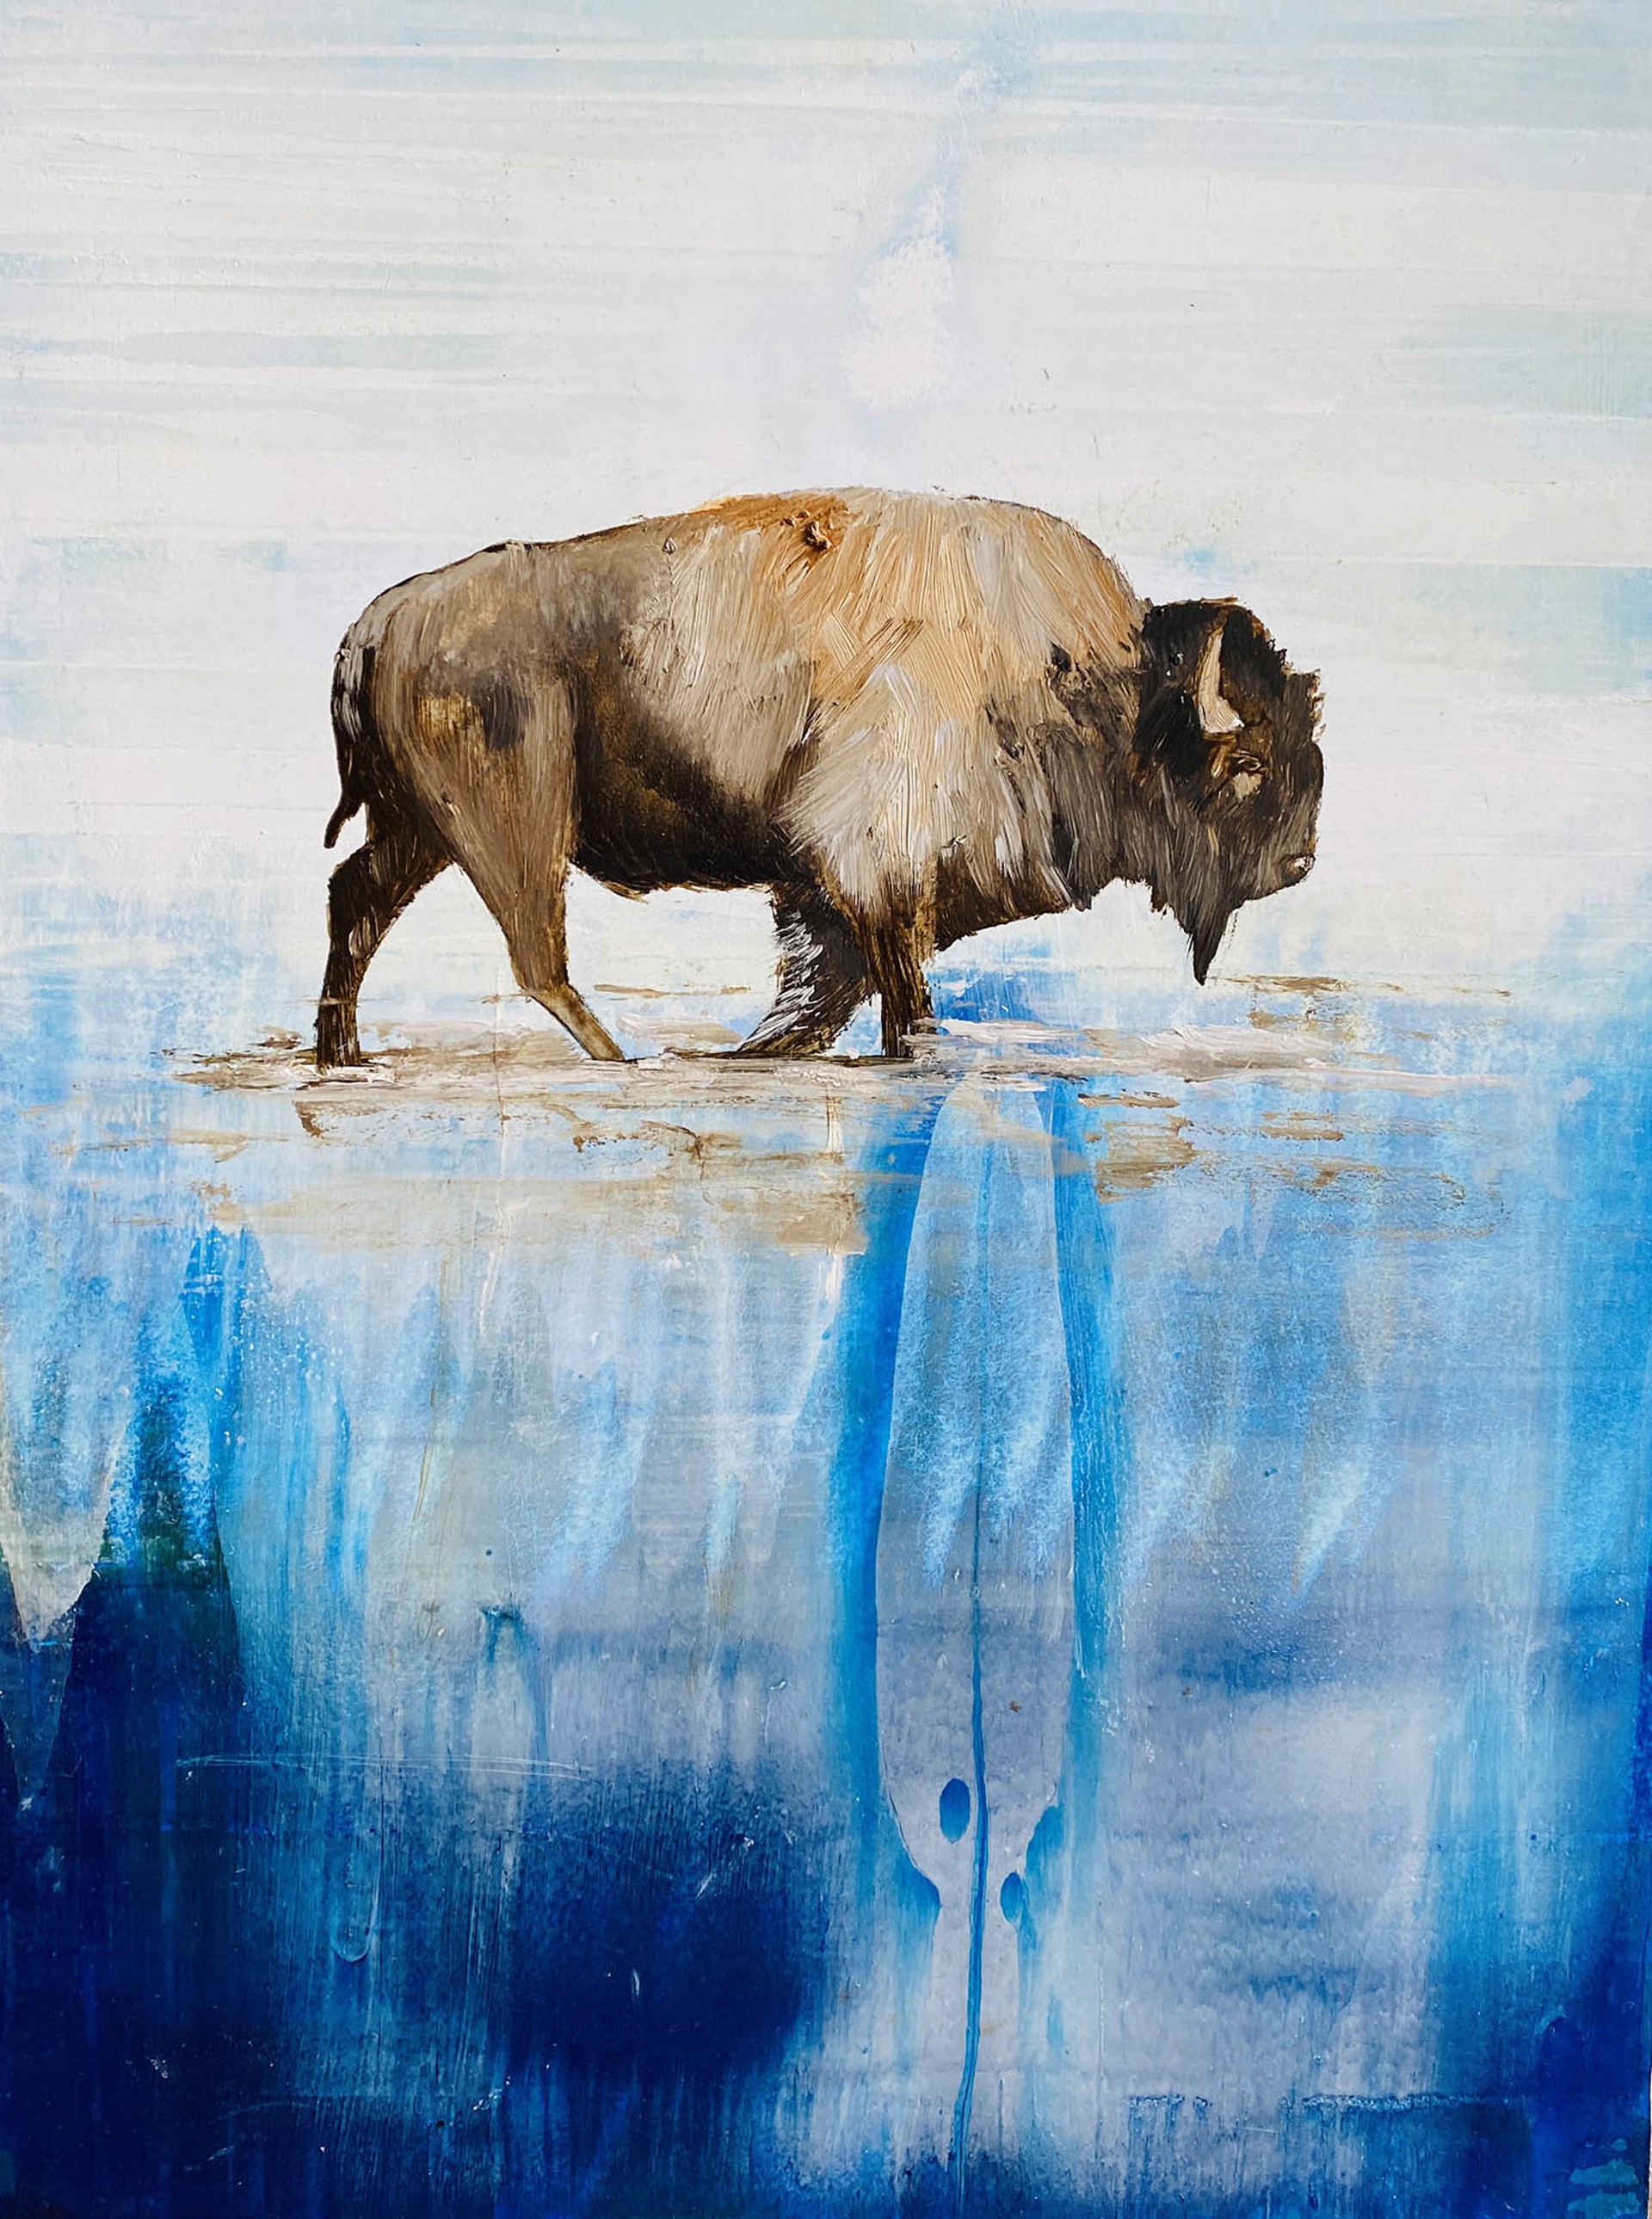 Original Oil Painting Featuring A Walking Bison Over Abstract Blue Background